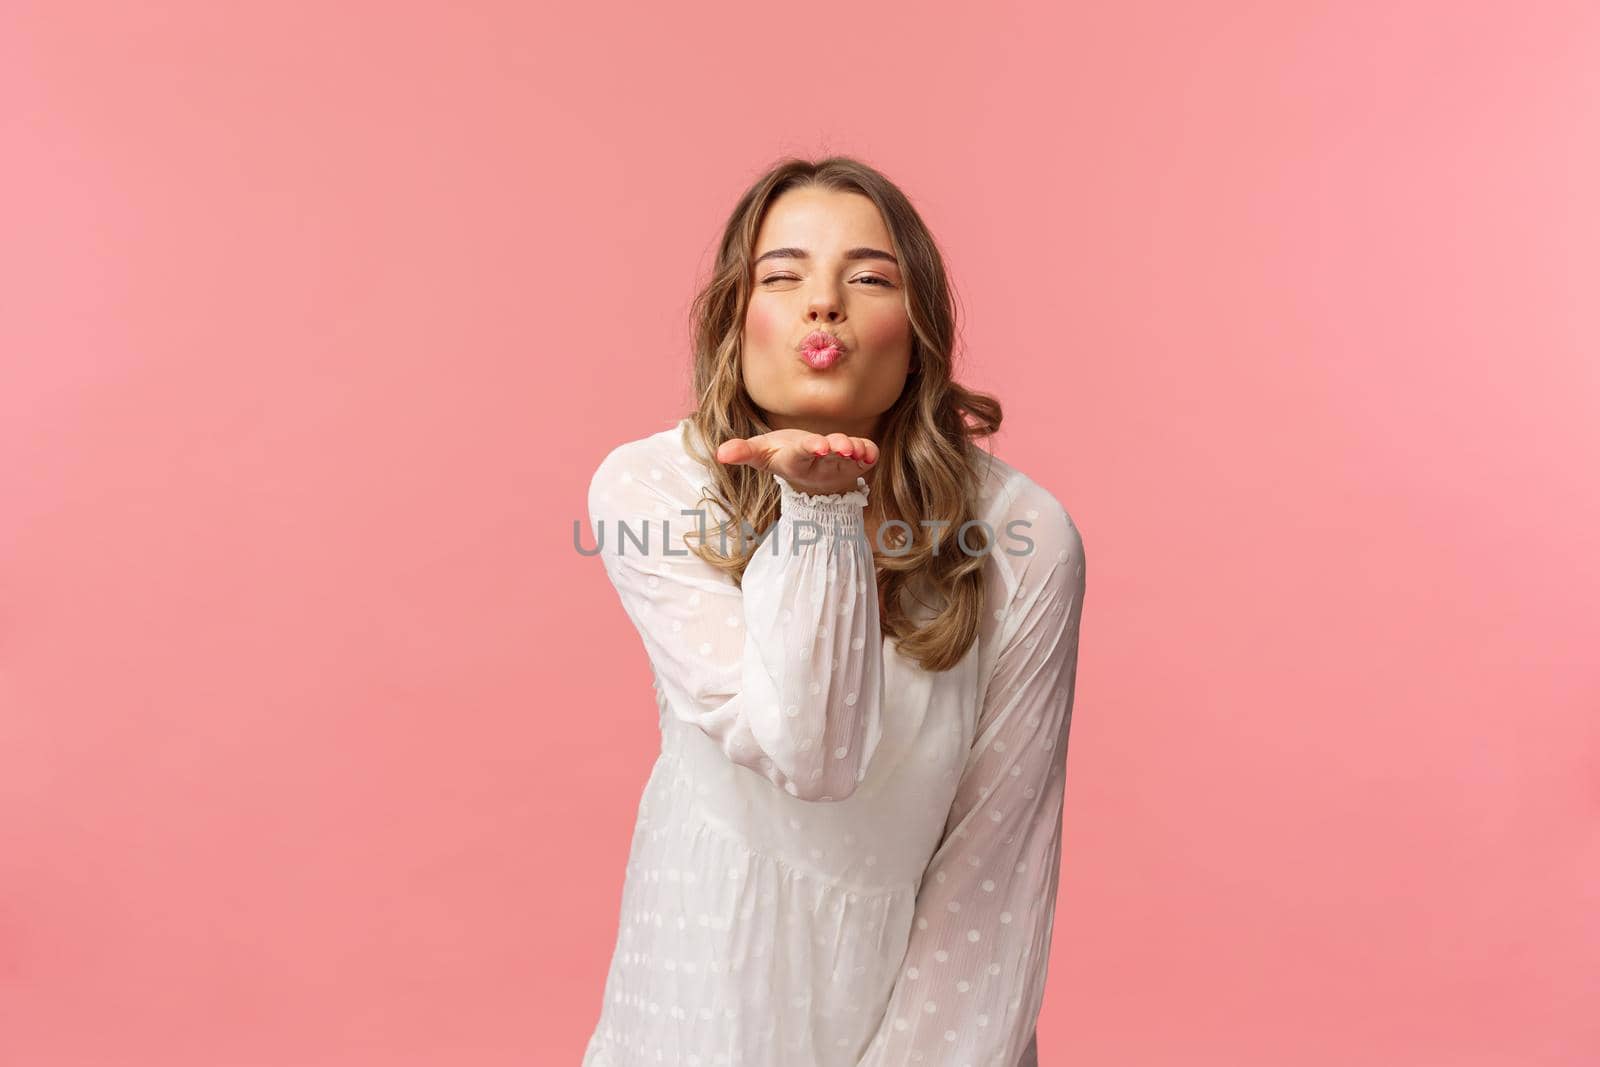 Beauty, fashion and women concept. Portrait of romantic tender, young blond woman in white trendy dress, sending air kiss at camera with sassy flirty smile, hold hand near lips, pink background.